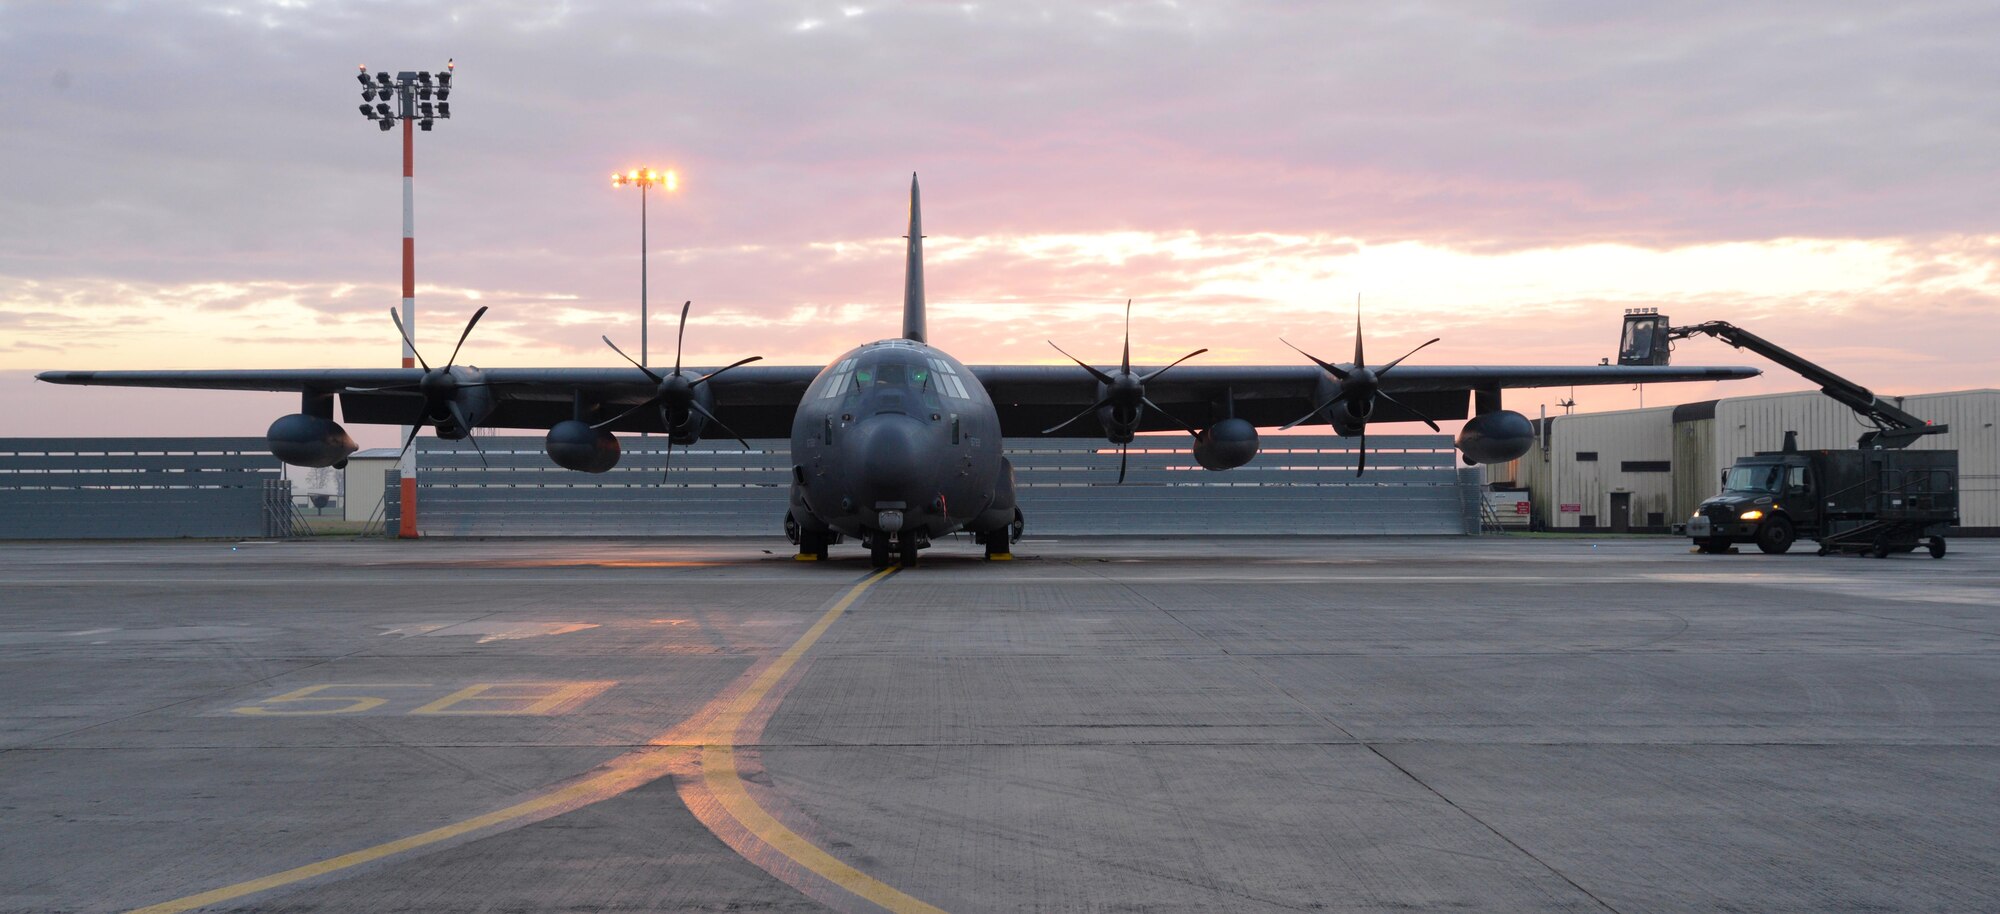 An MC-130J Commando II, from the 67th Special Operations Squadron, is prepared for de-icing during pre-flight procedures Jan. 17, 2017, on RAF Mildenhall, England. Freezing temperatures can cause ice to build up on the aircraft. De-icing procedures ensure that the aircraft’s flight controls are free-moving during take-off and inflight. (U.S. Air Force photo by Senior Airman Justine Rho)